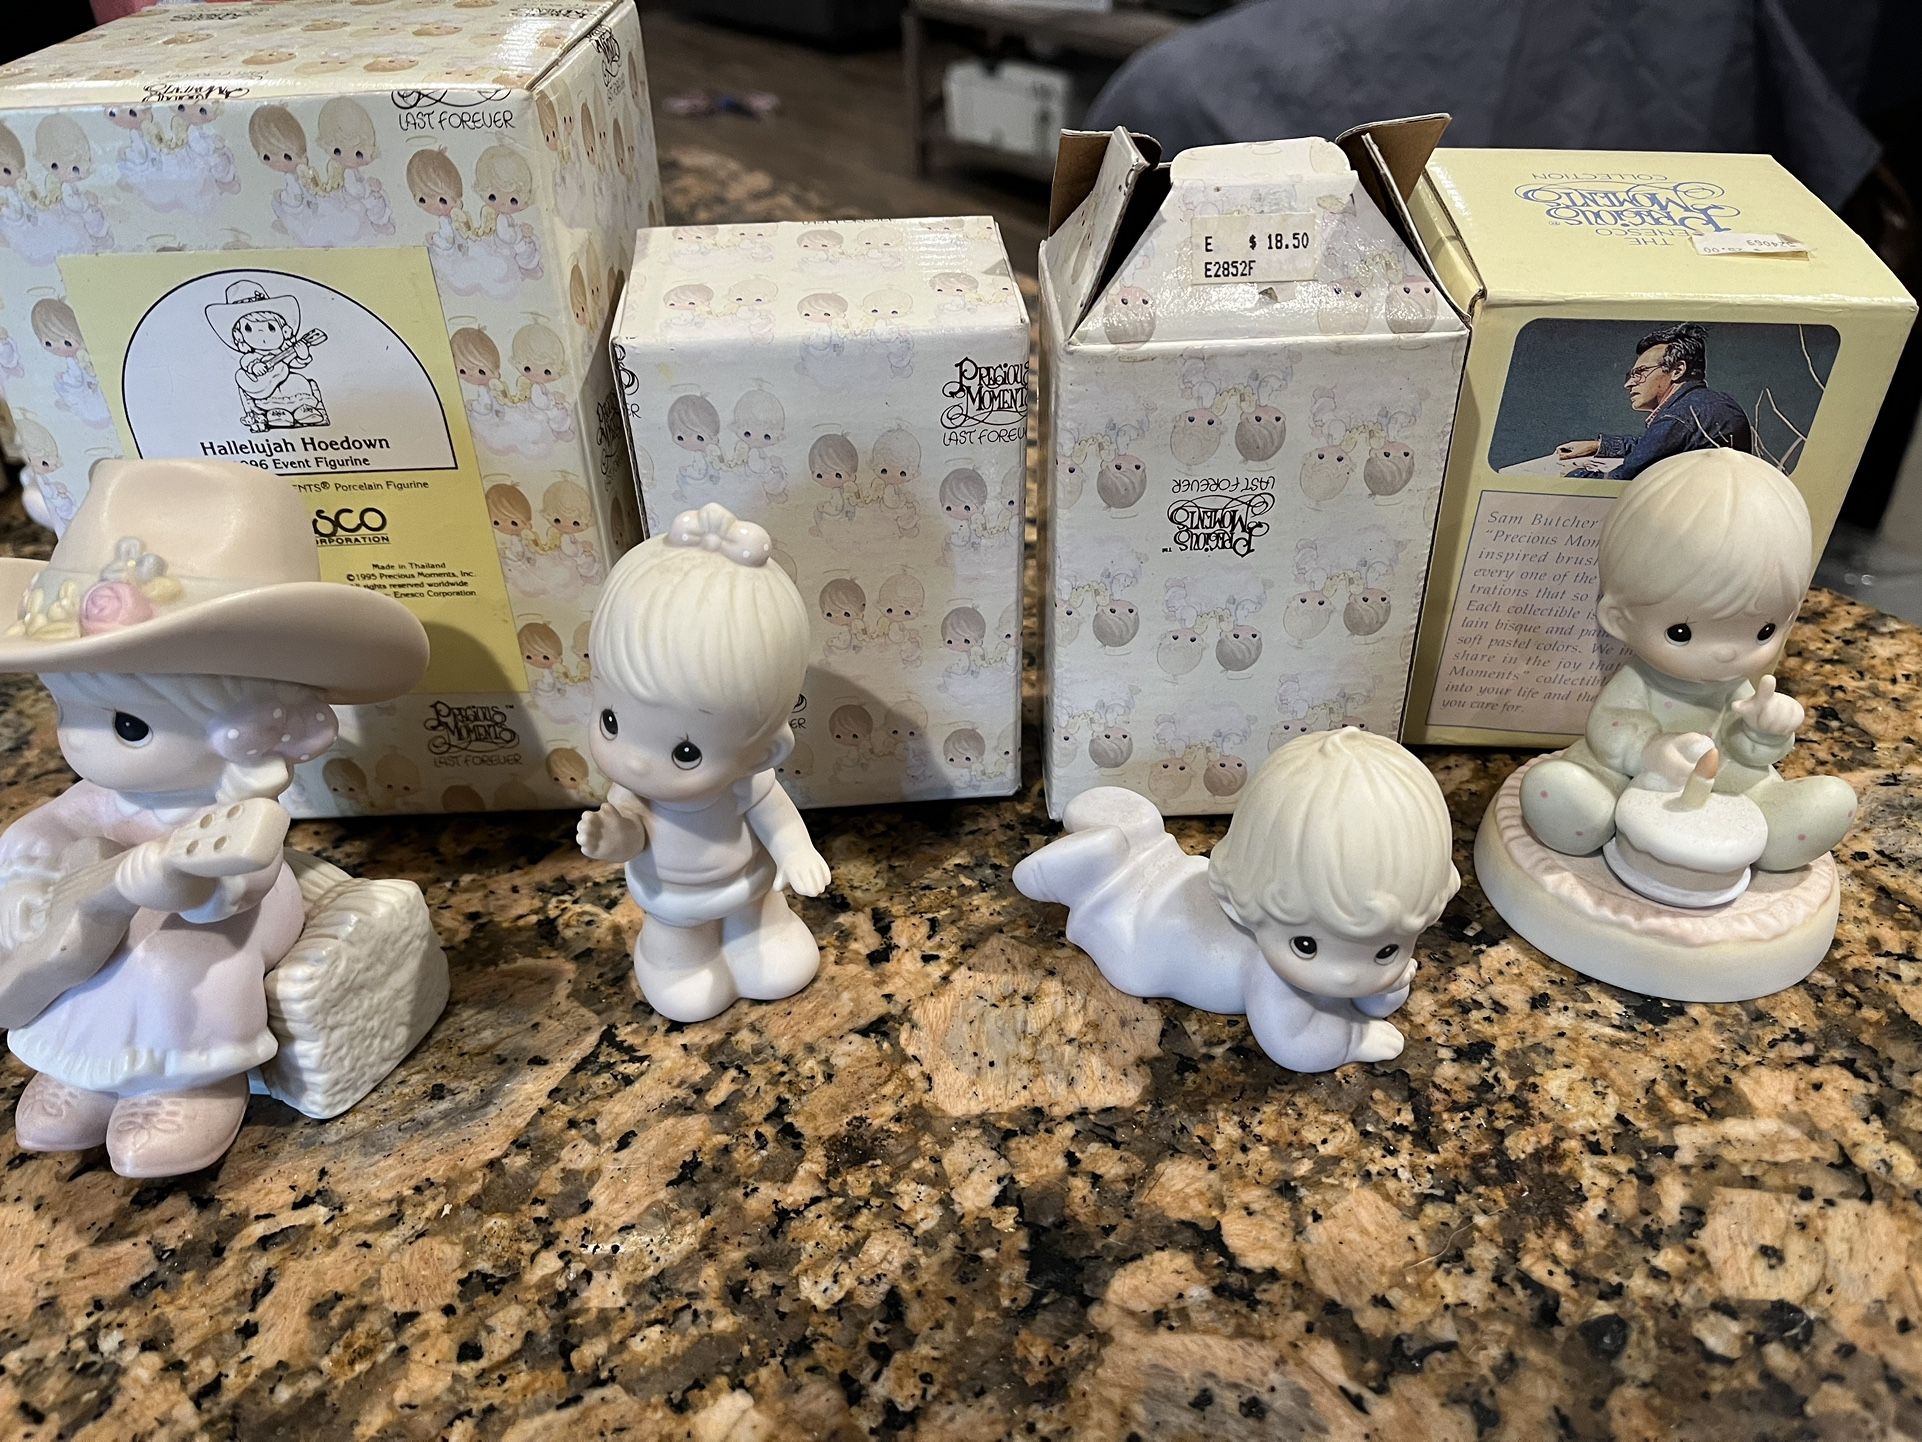 We Are Selling 66 Precious Moments Figurines As Seen In Photos!!